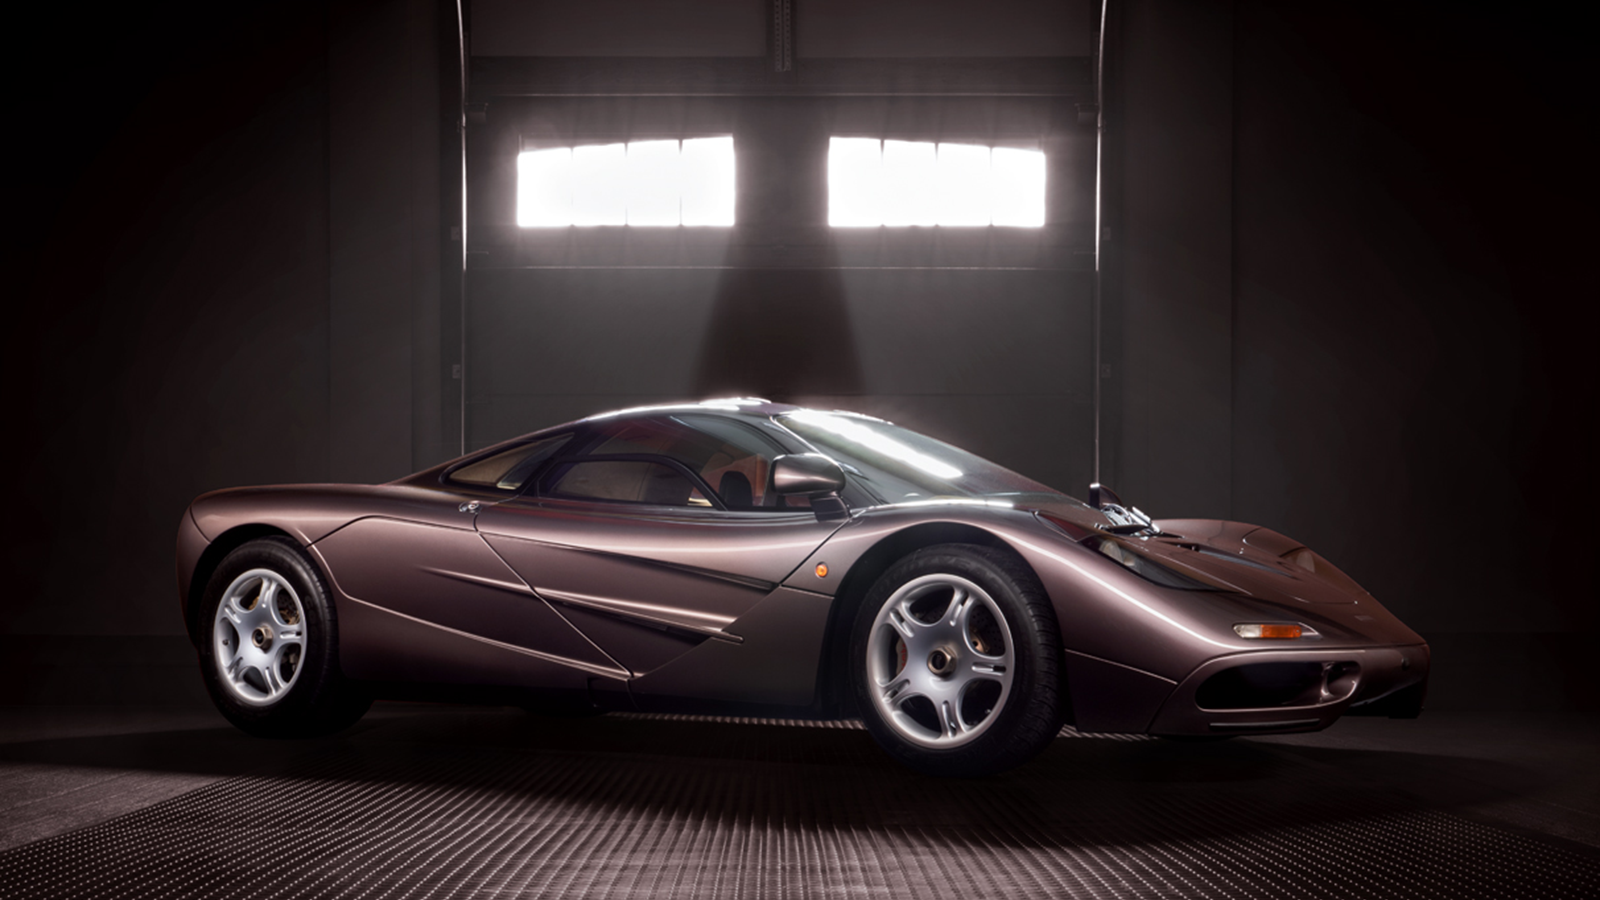 The unbelievable running costs of a McLaren F1 revealed by an